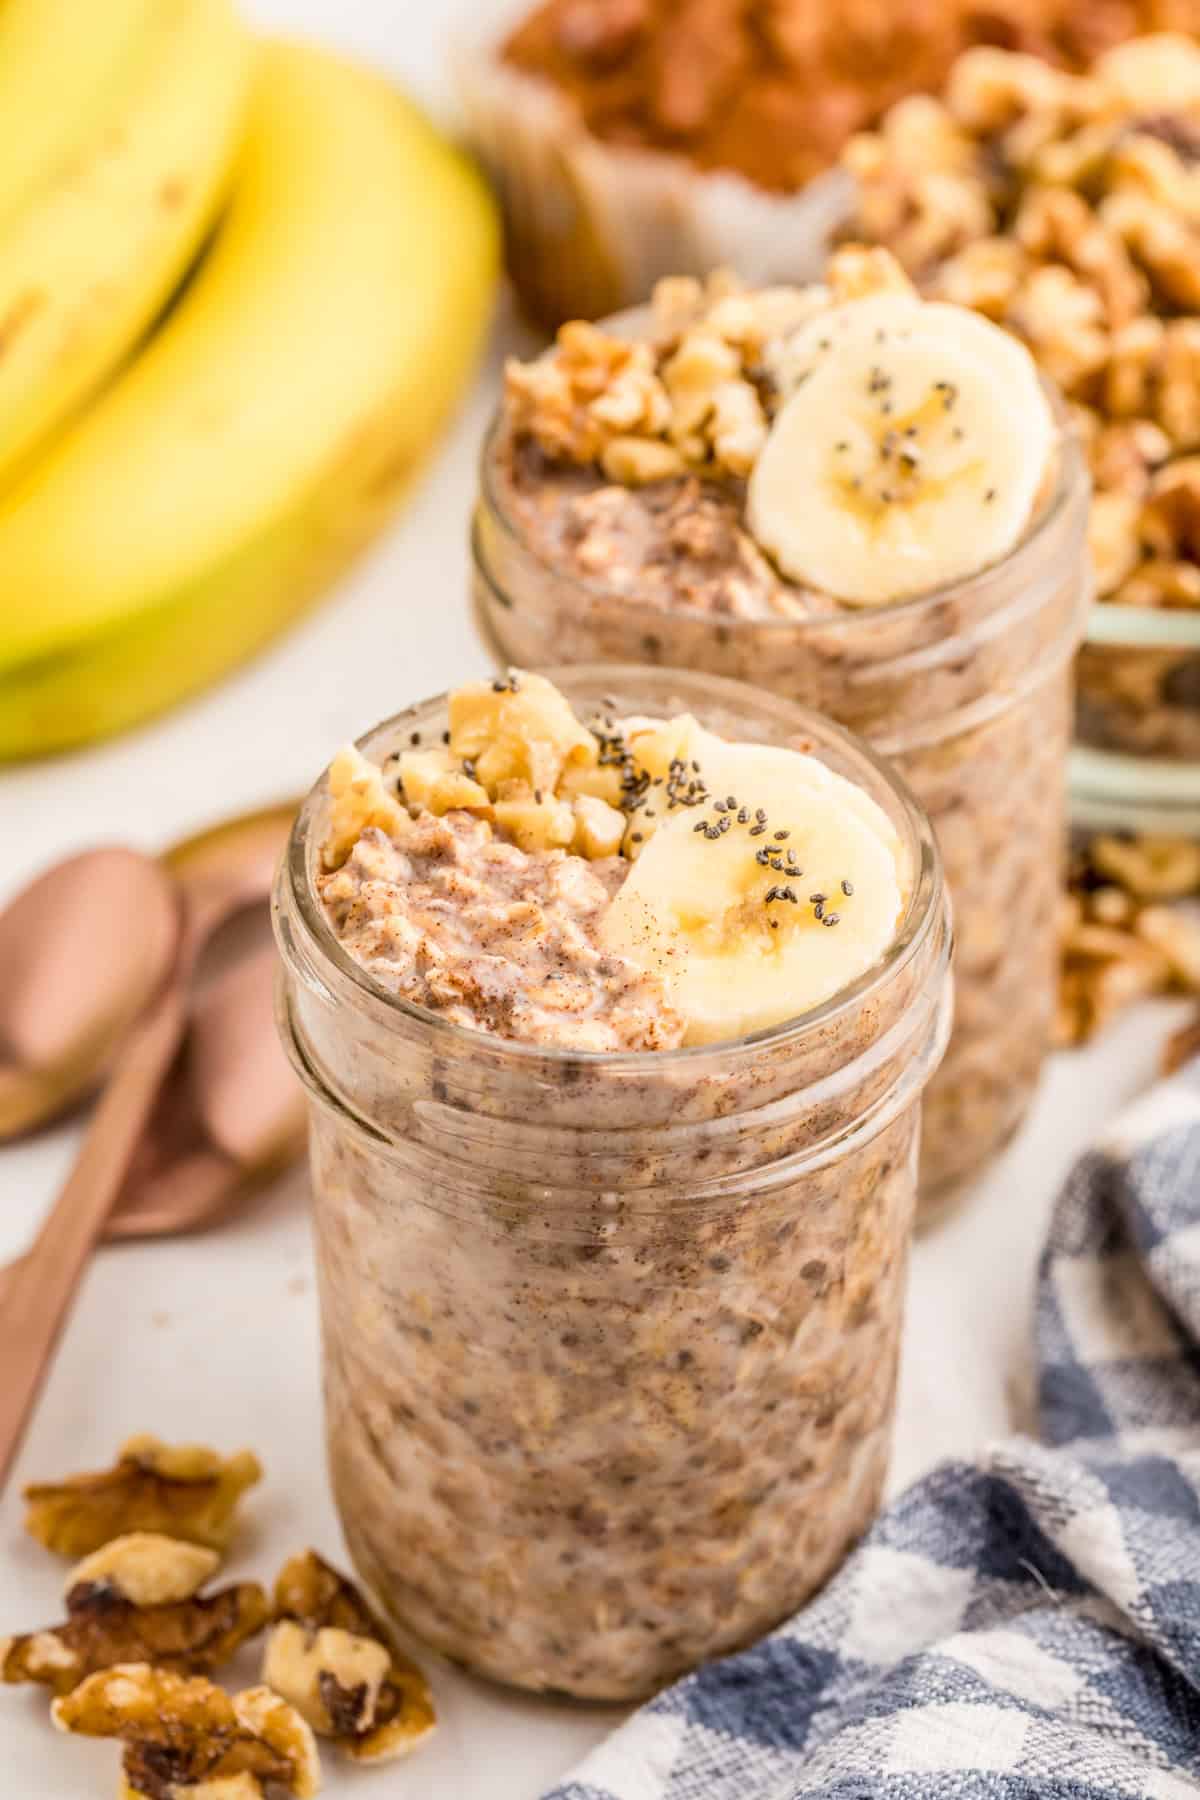 Two jars of Banana Overnight Oats topped with bananas, chia seeds and walnuts with other ingredients around jars.